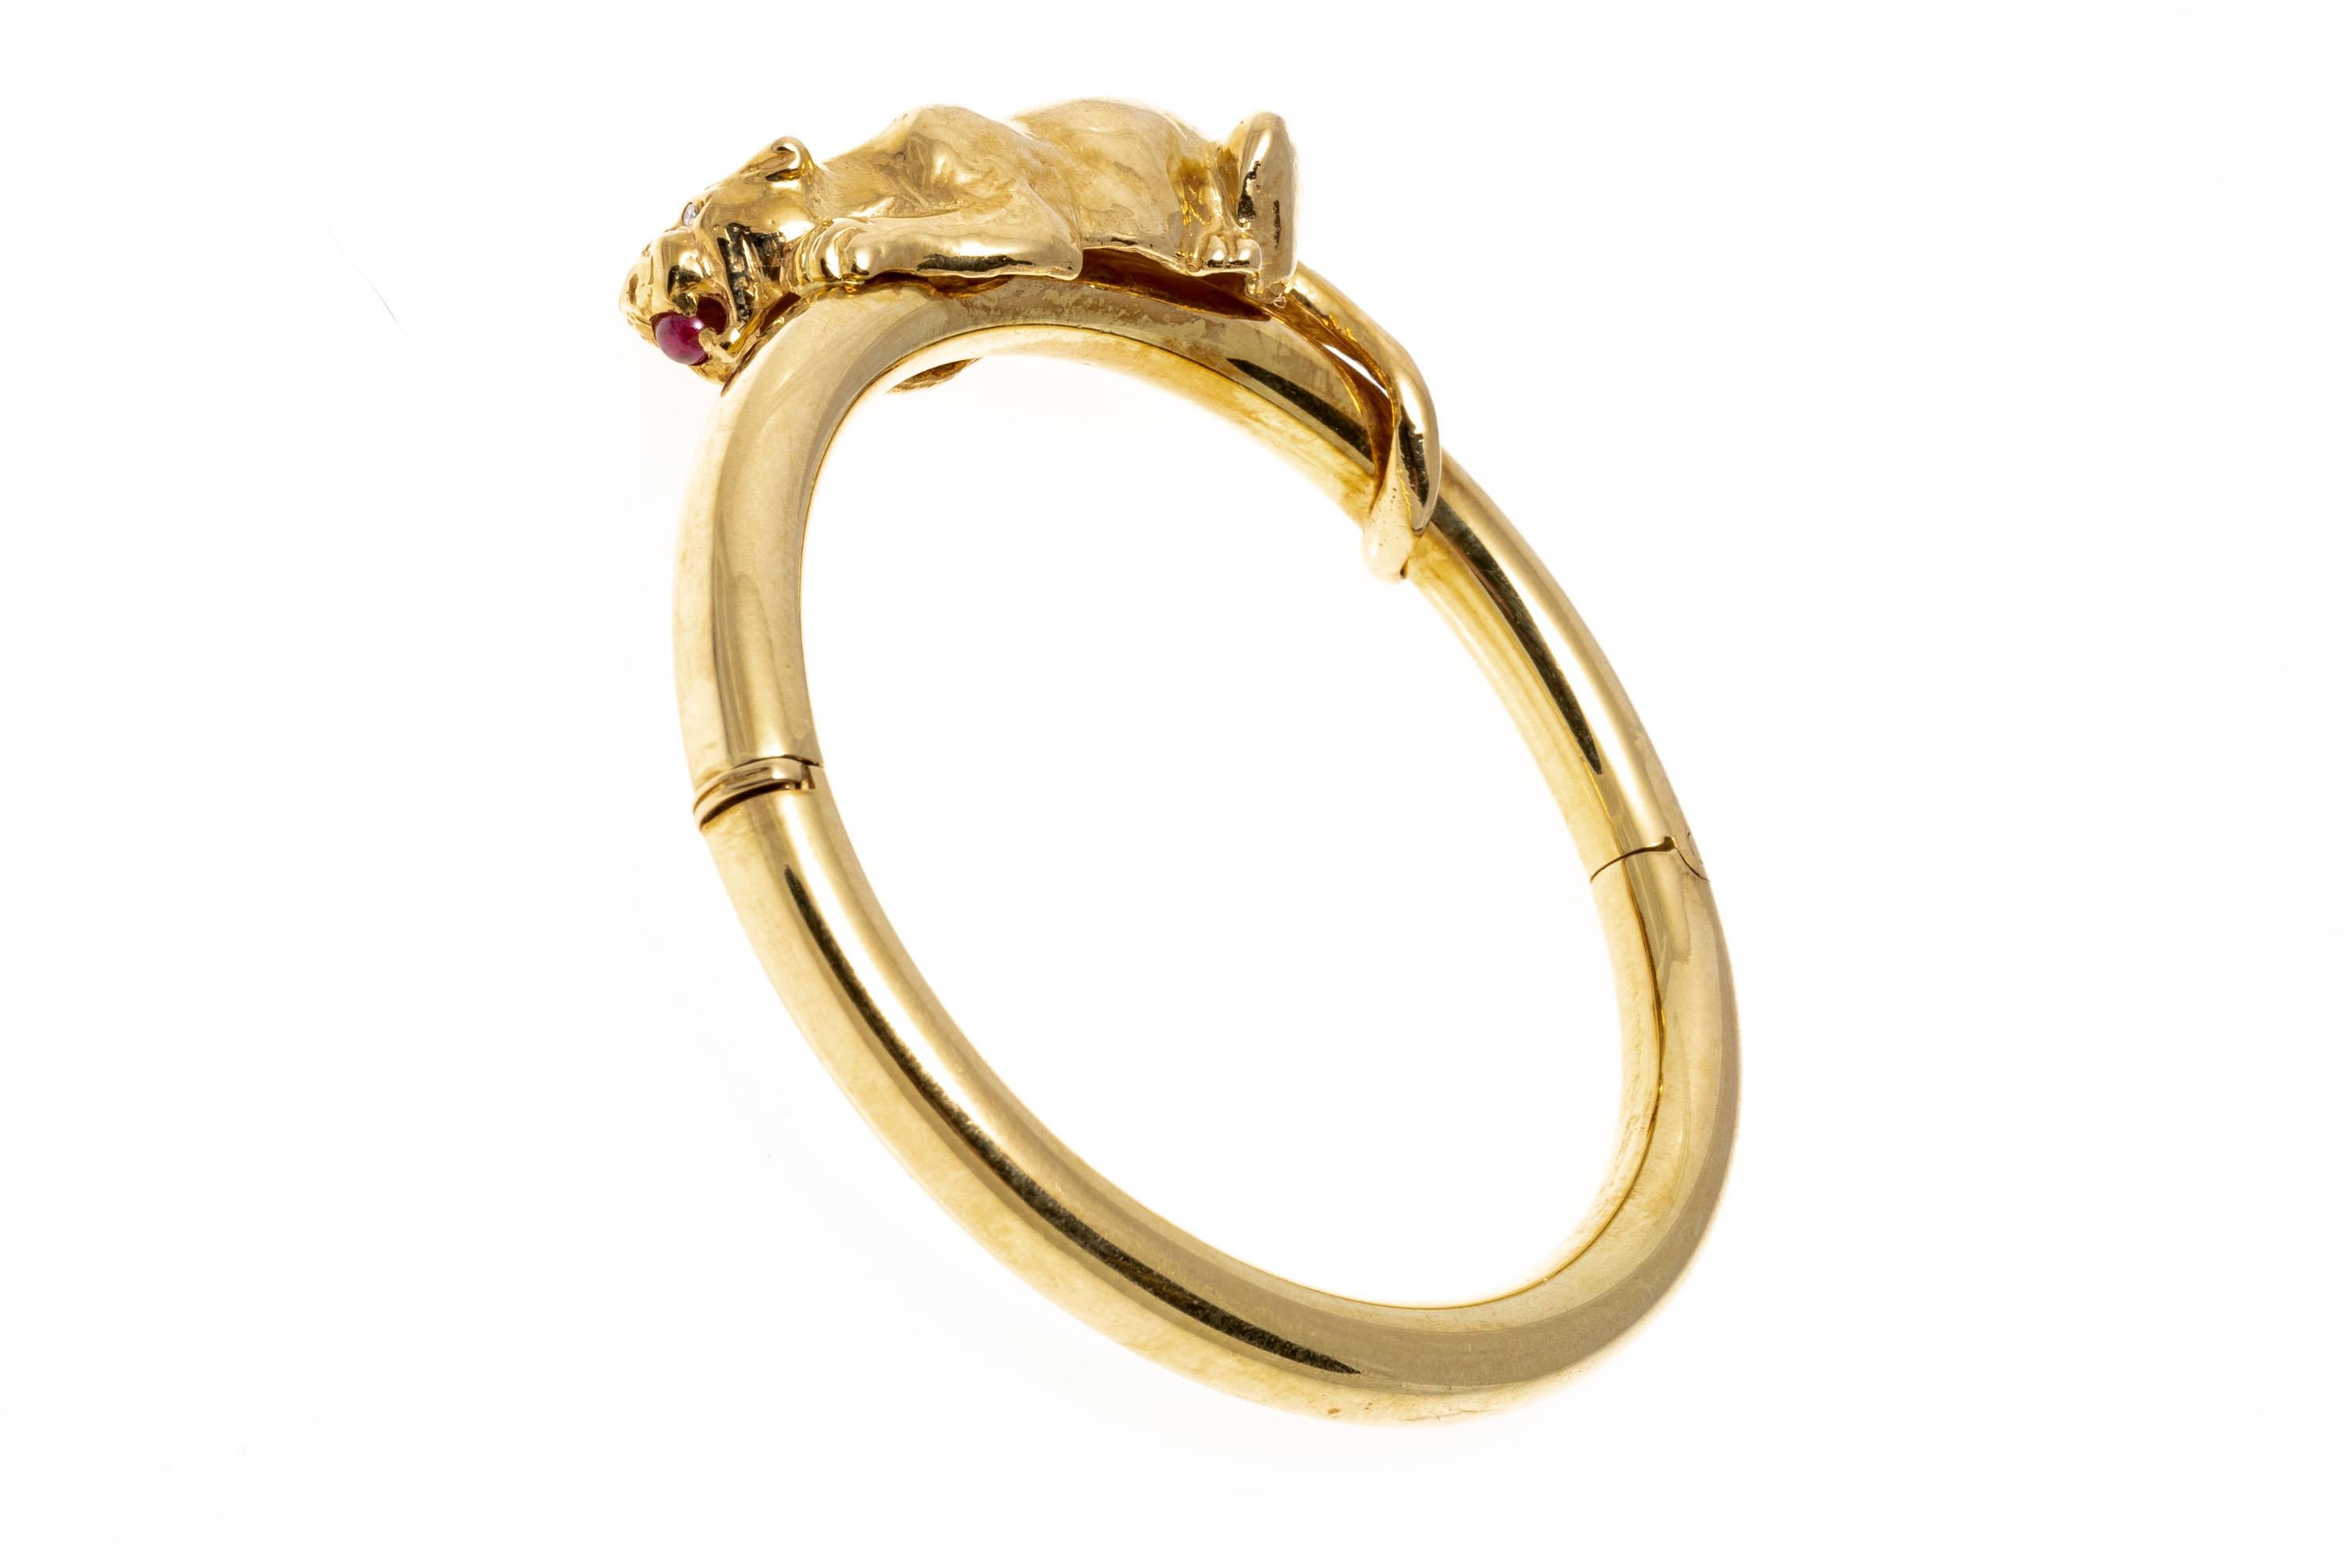 Women's 18k Yellow Gold Figural Crouching Panther Hinged Bangle Bracelet For Sale